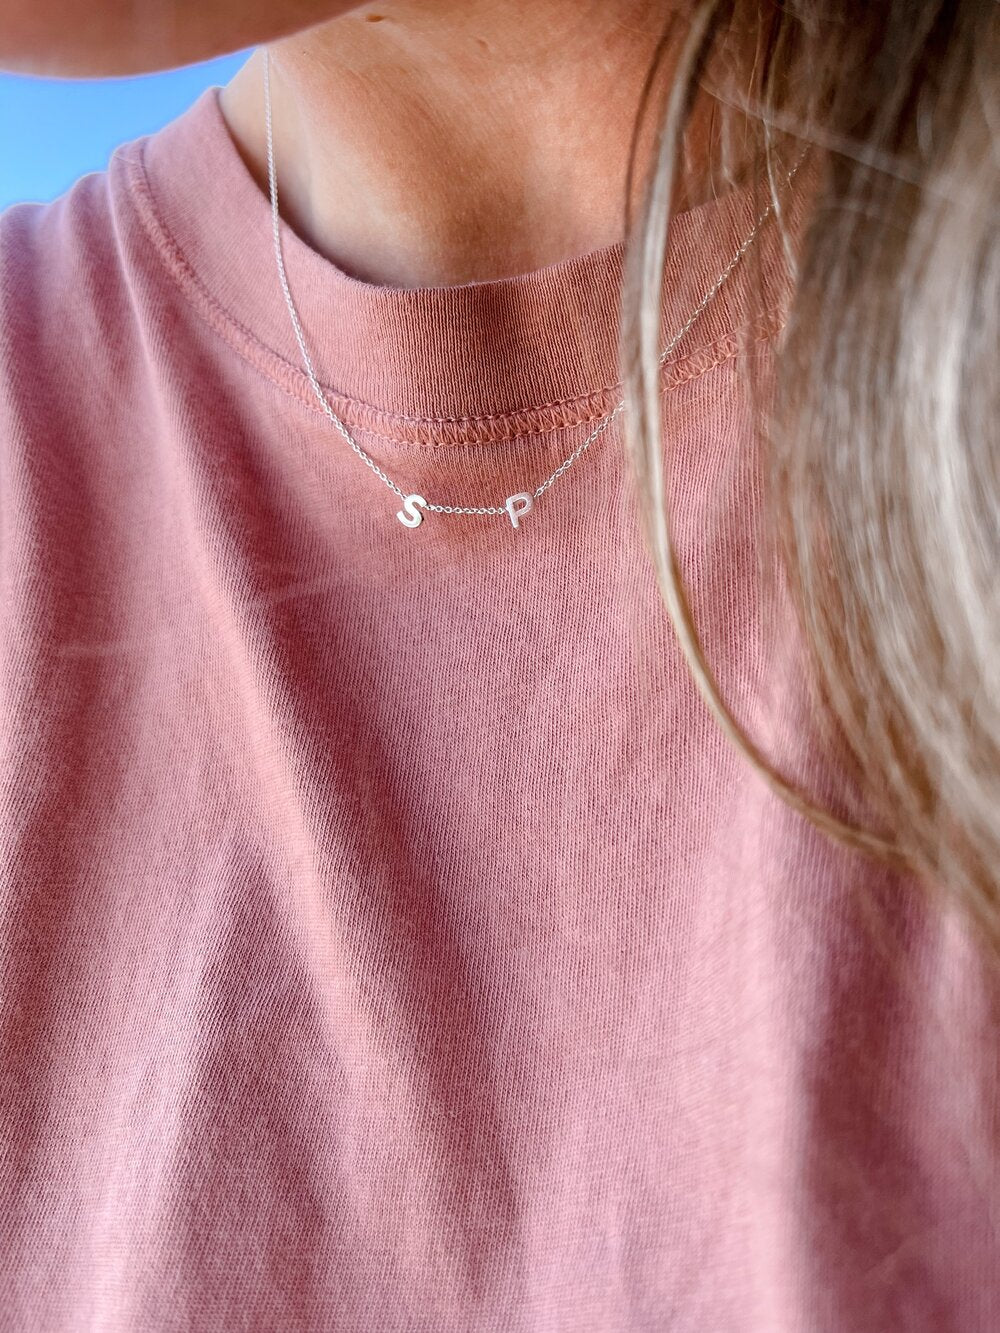 Tiny Alphabet Layering Necklace - Minimal Style Sterling Silver Letter Necklace